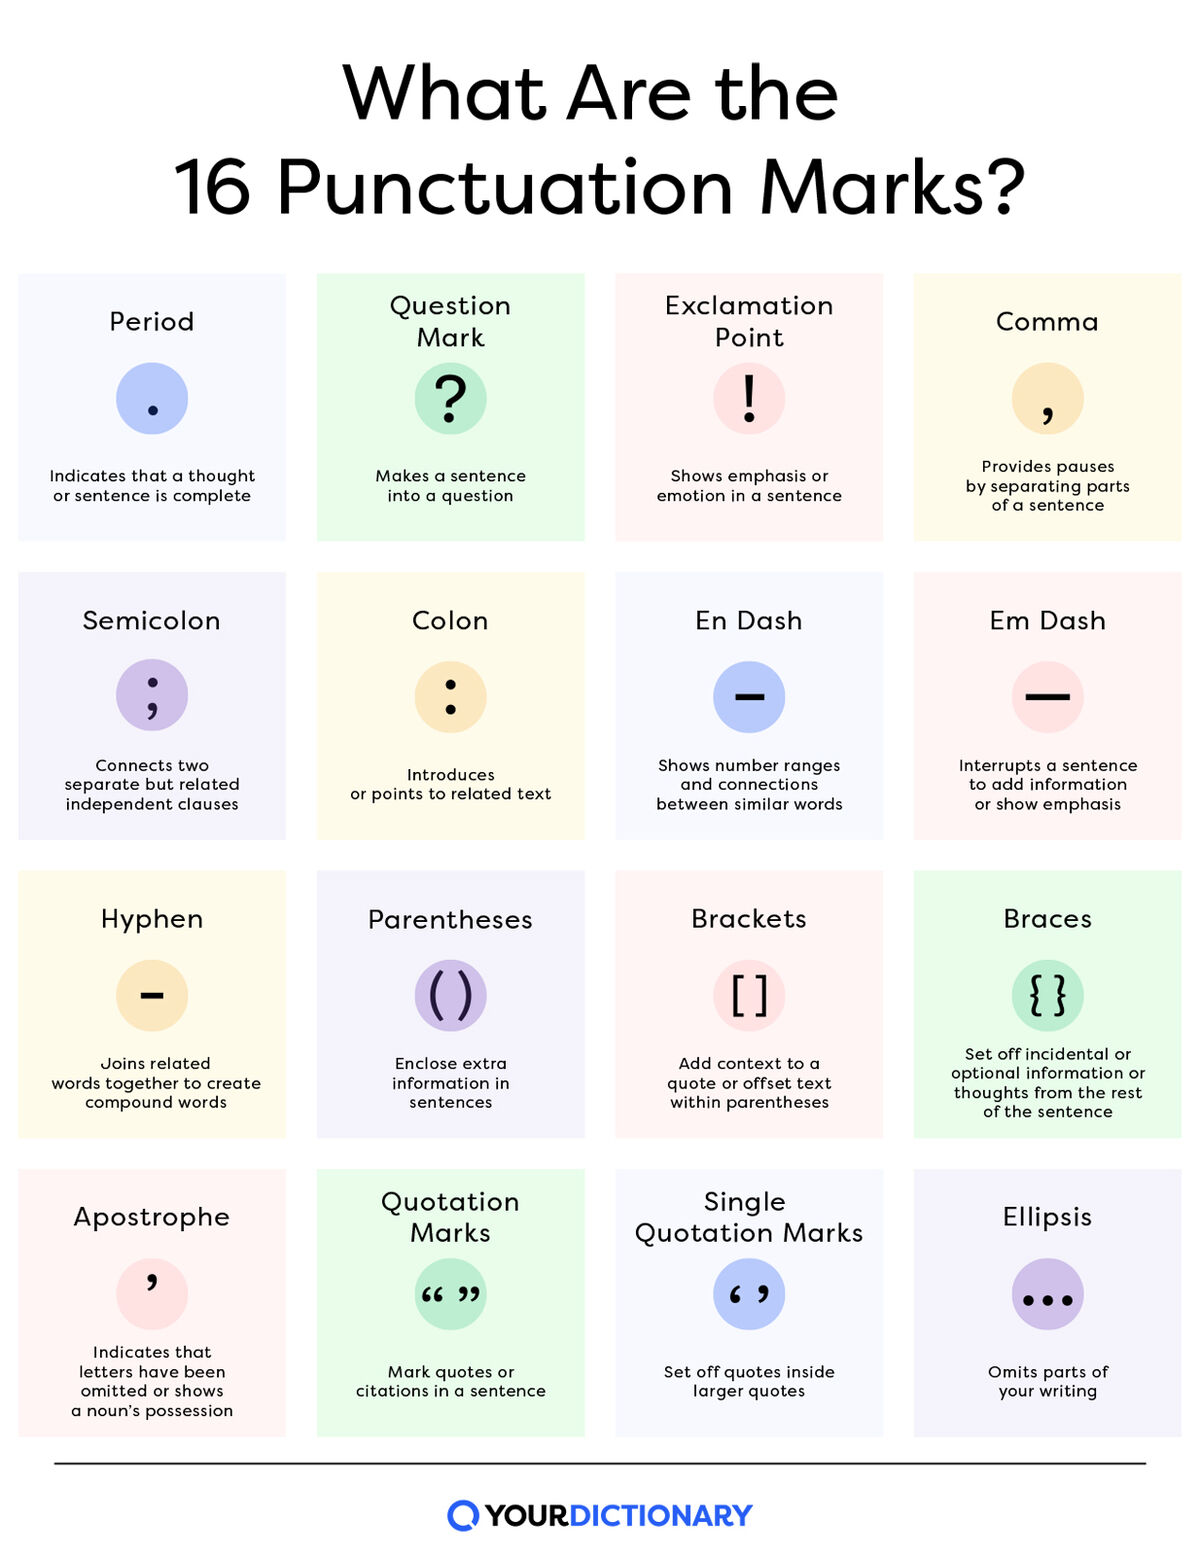 A chart of all 16 punctuation marks from the article.